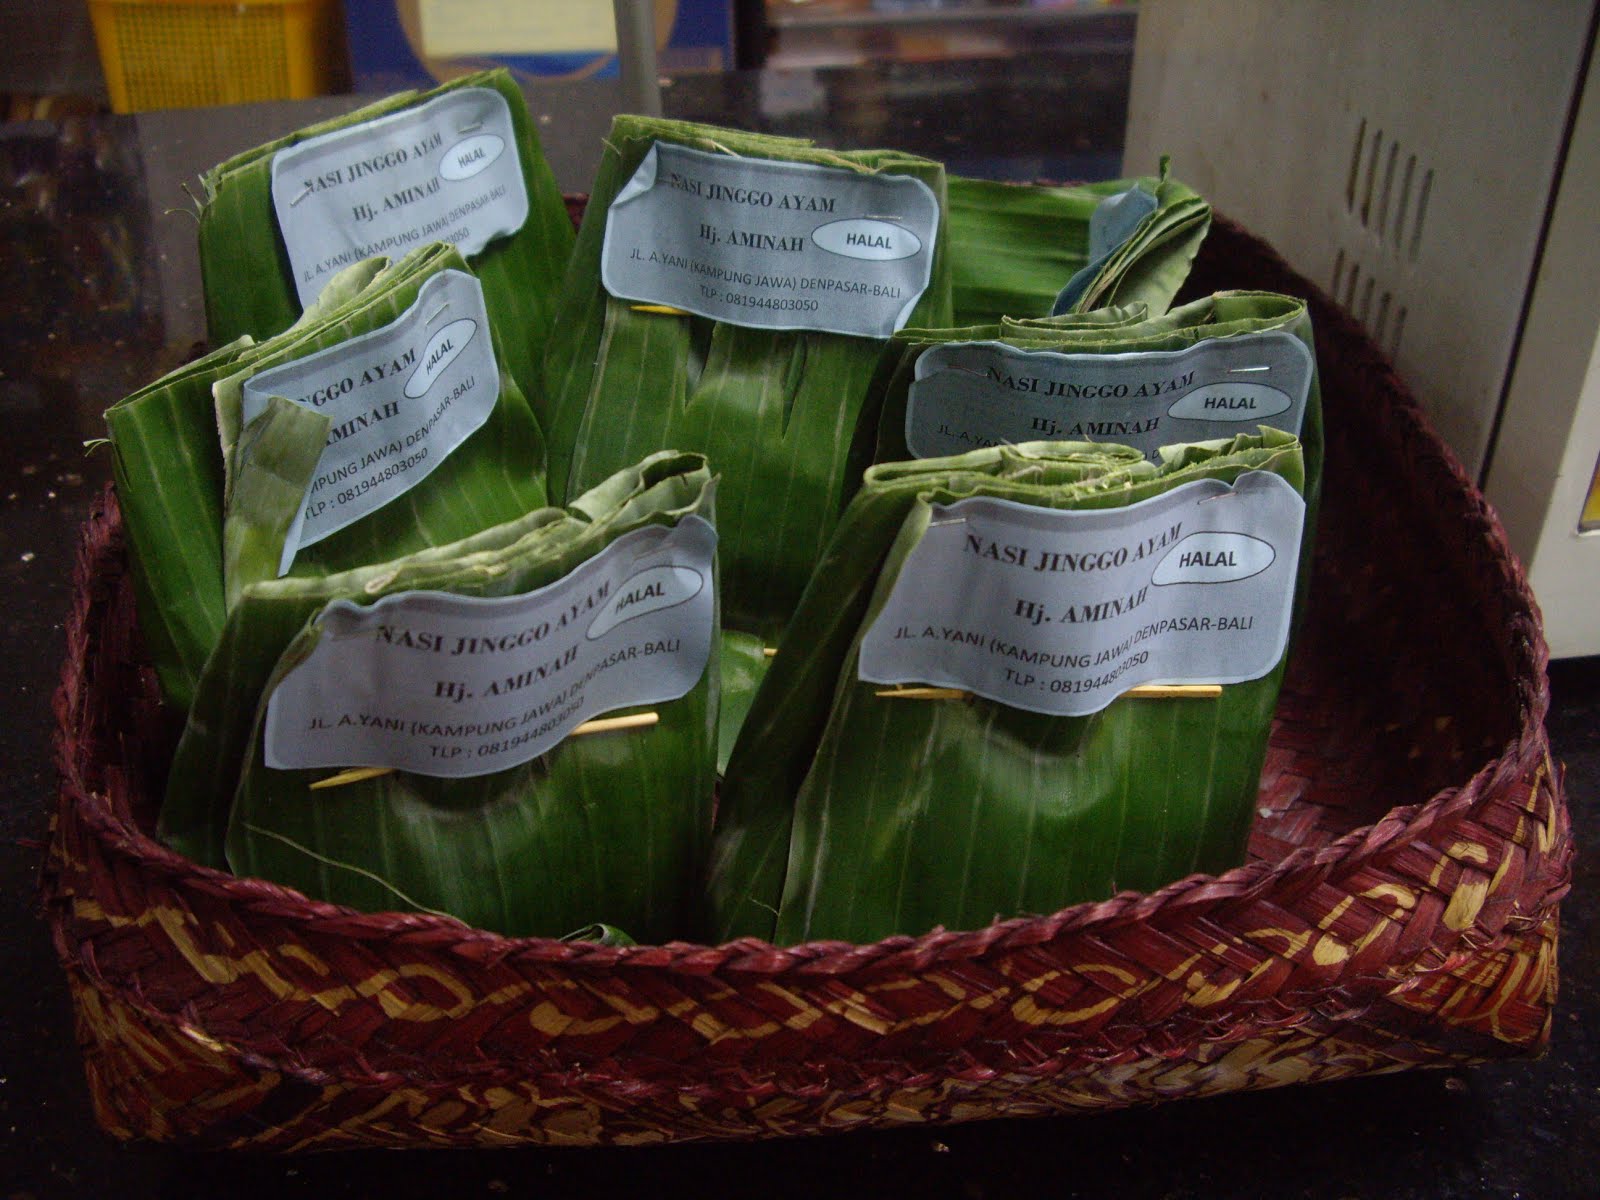 NASI JENGGO--PURE CULINARY MAGIC IN BANANA LEAF PACKETS, FOUND IN LOCAL BALINESE MARKETS